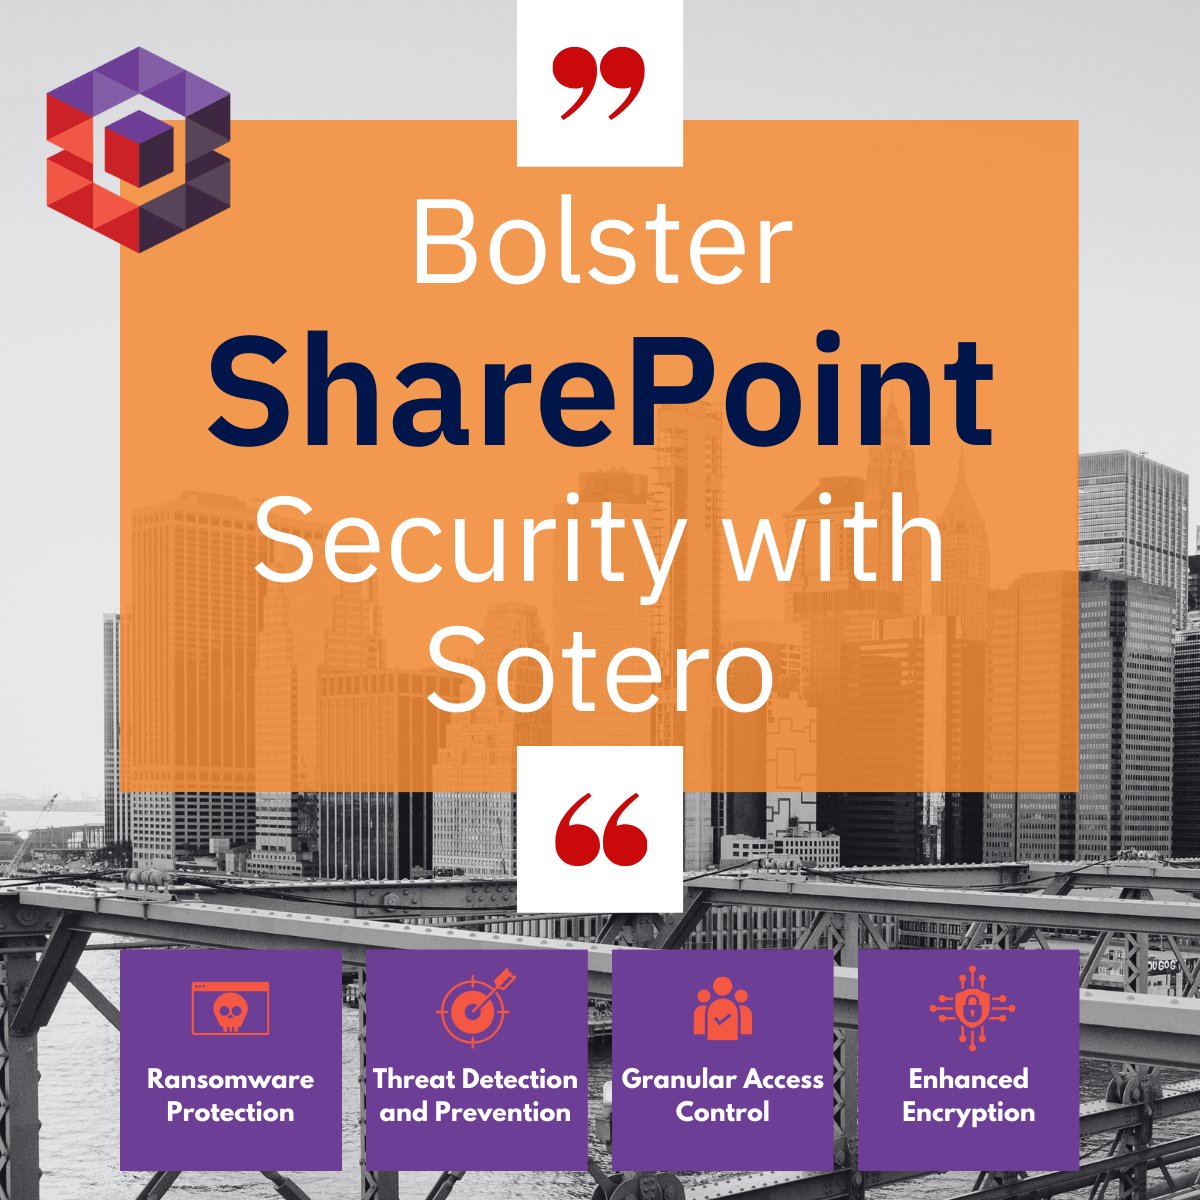 🔒 Concerned about admin access compromising SharePoint security? With Sotero, rest assured sensitive data is shielded from internal threats. Don't risk admin privileges - secure SharePoint with Sotero now! info.soterosoft.com/sharepoint-sec… #SharePoint